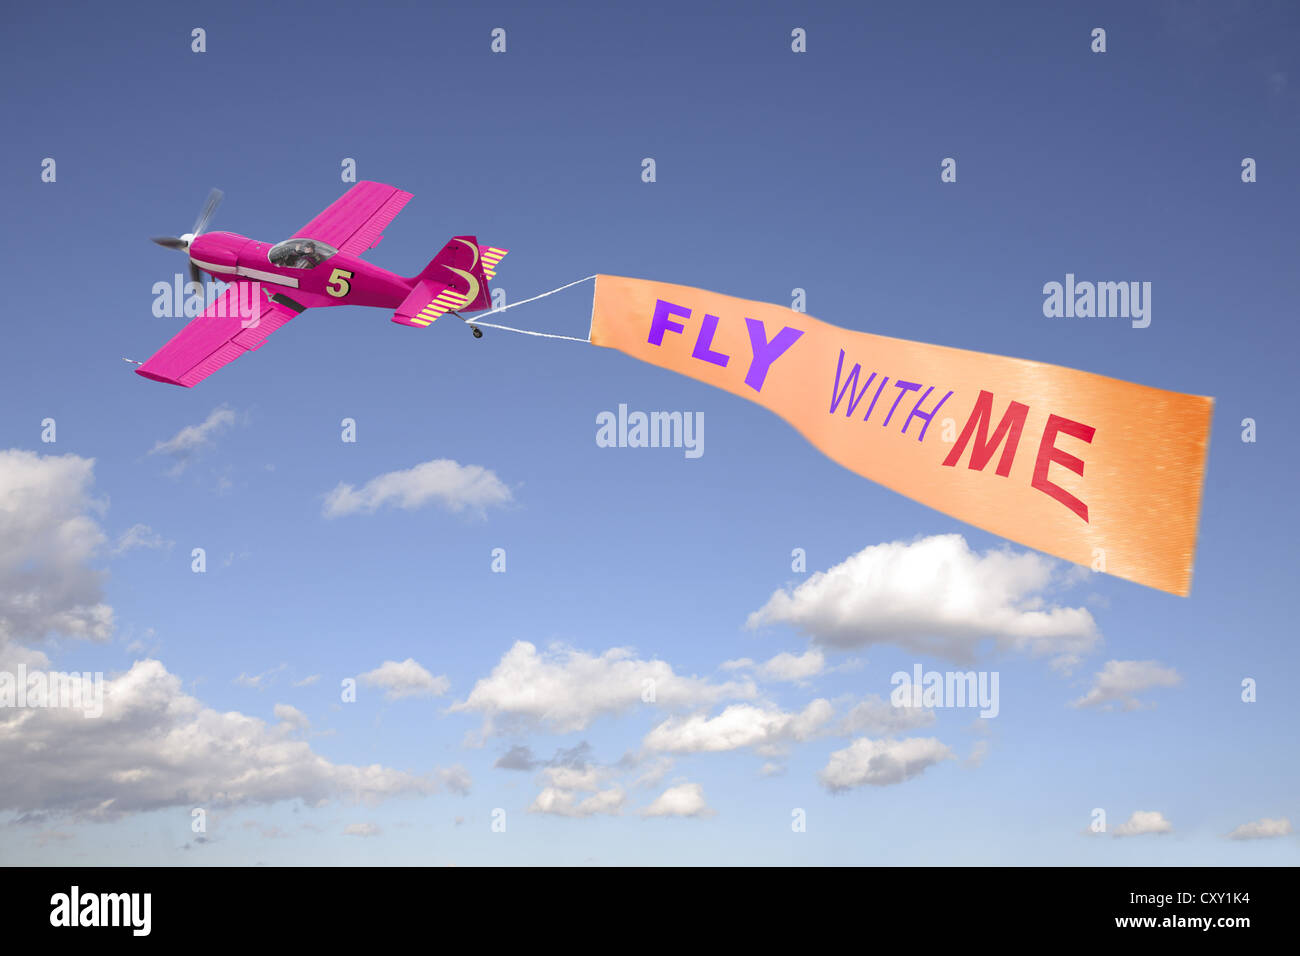 Plane in the sky pulling a banner with the message Fly with me, illustration Stock Photo